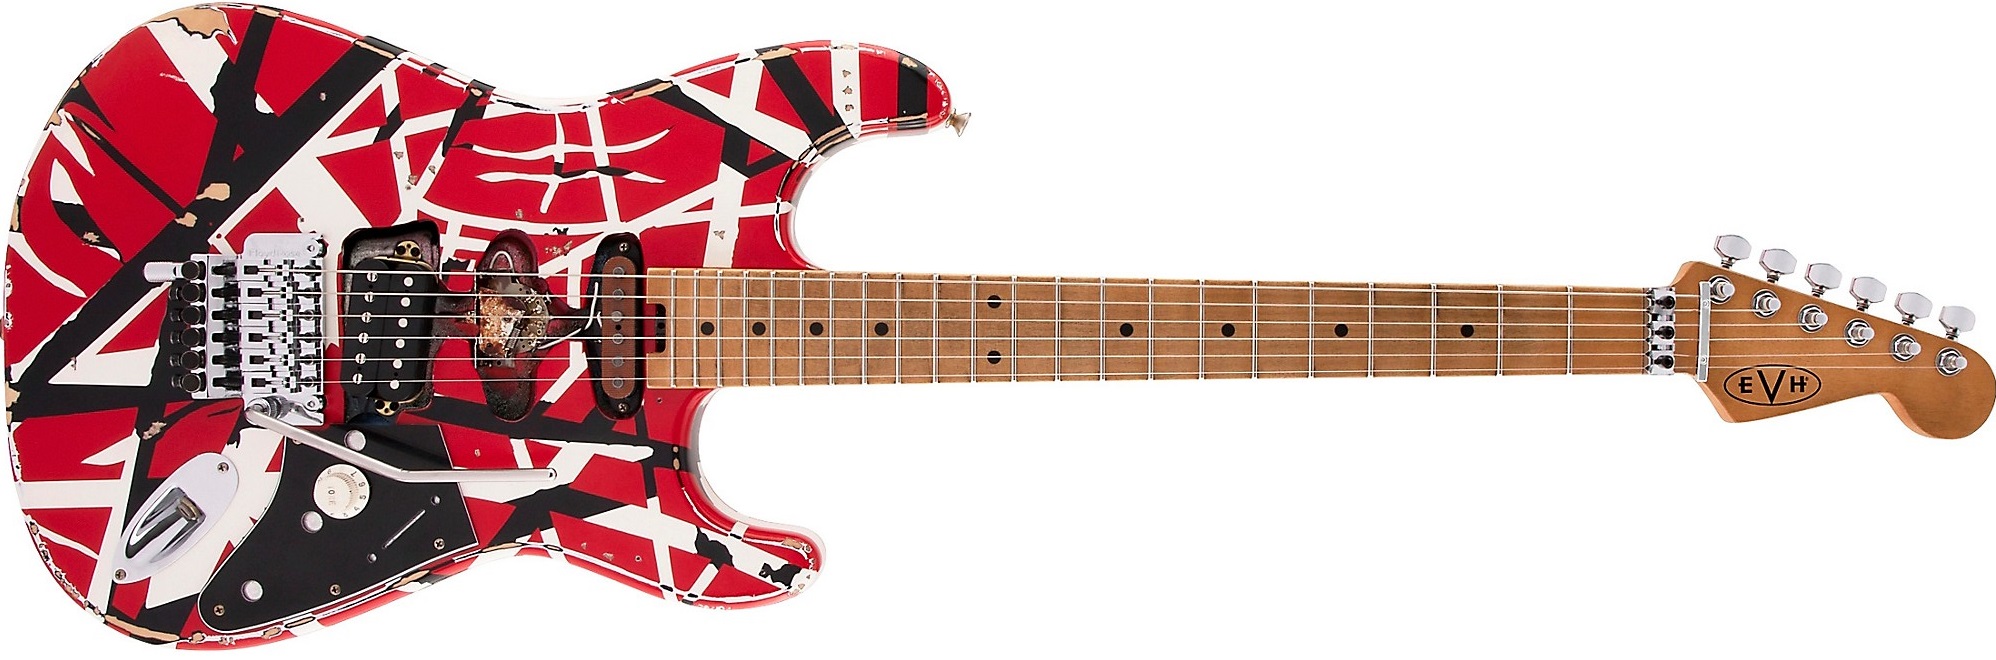 EVH Striped Series Frankie Electric Guitar on a white background